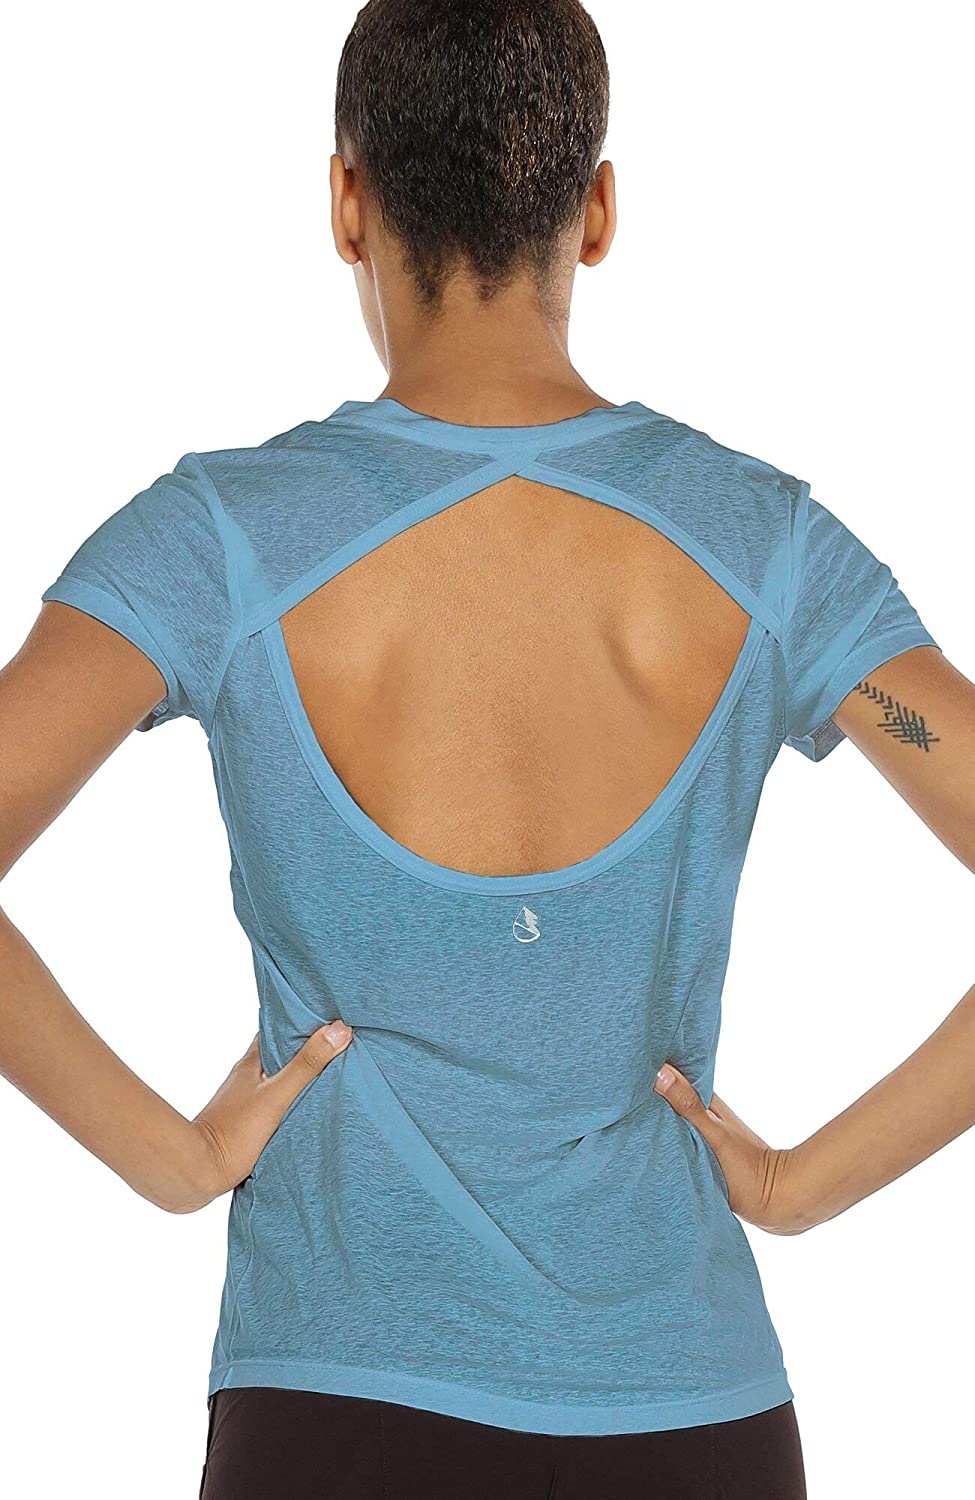 icyzone Open Back Workout Top Shirts - Yoga t-Shirts Activewear